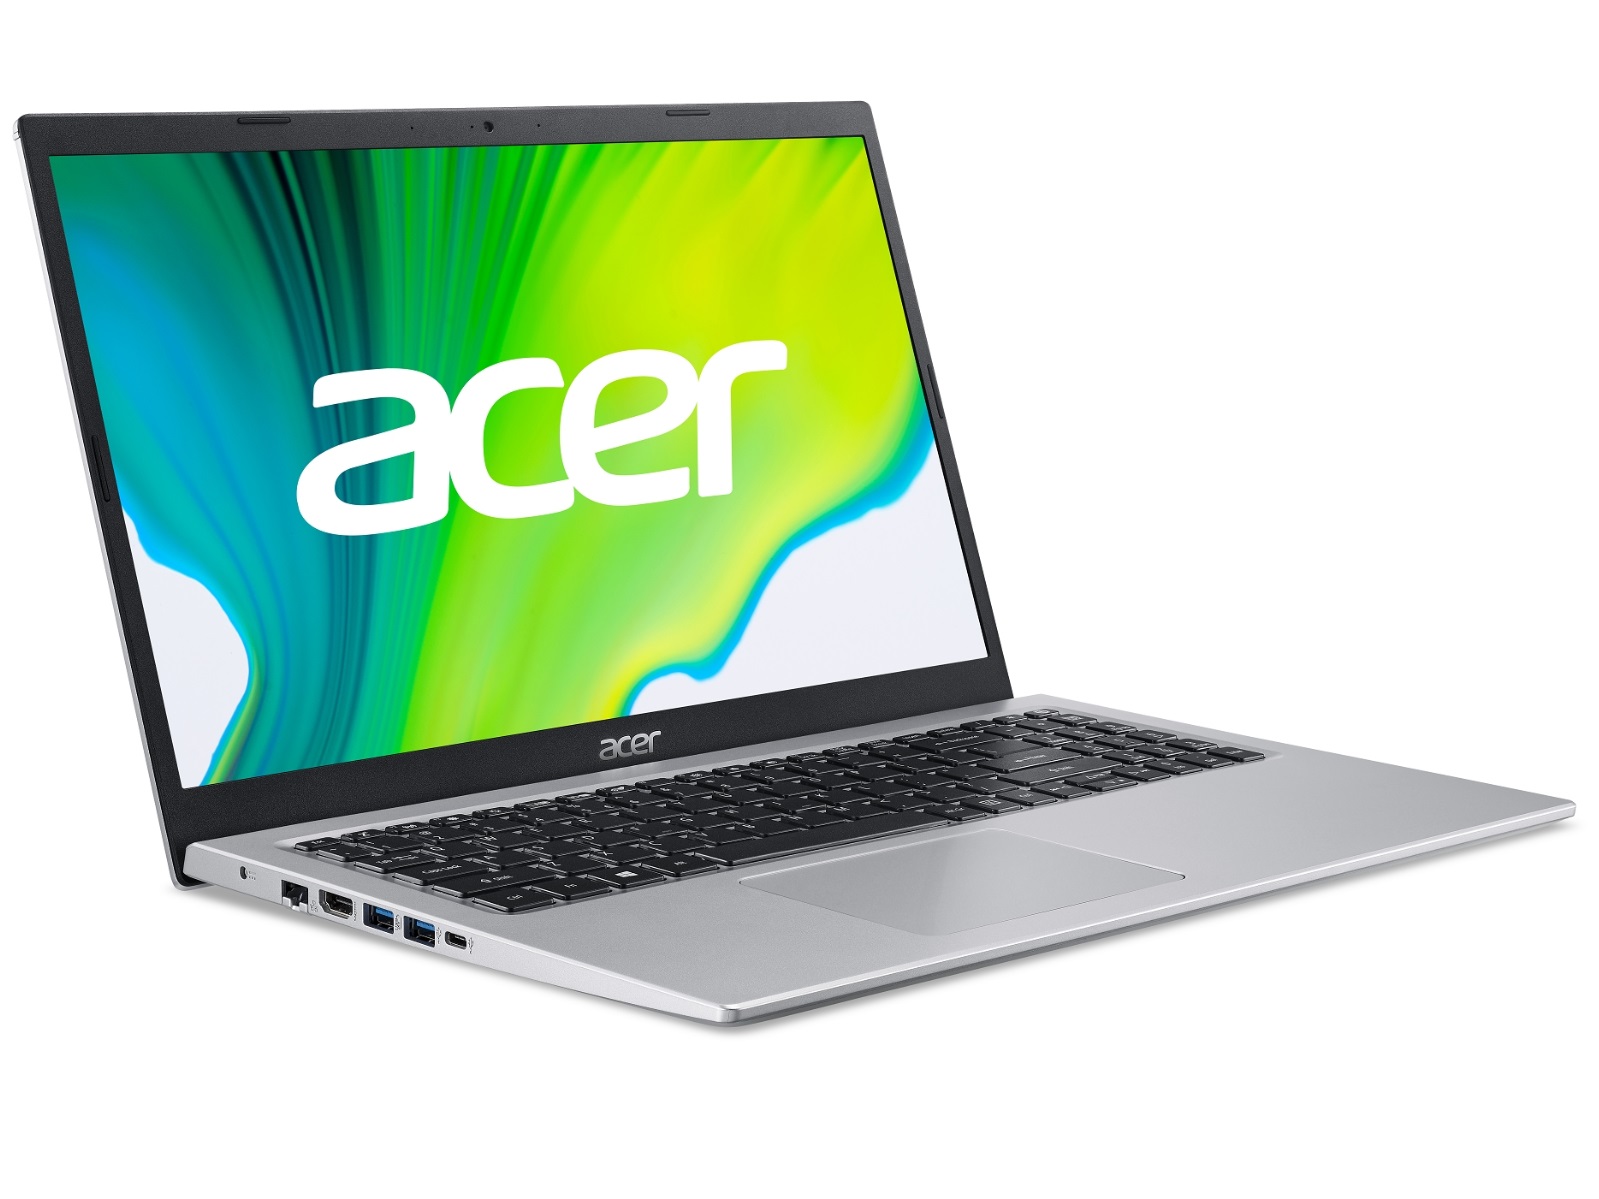 Acer Aspire 5 A515 in review: A look at a Tiger Lake laptop - NotebookCheck.net Reviews